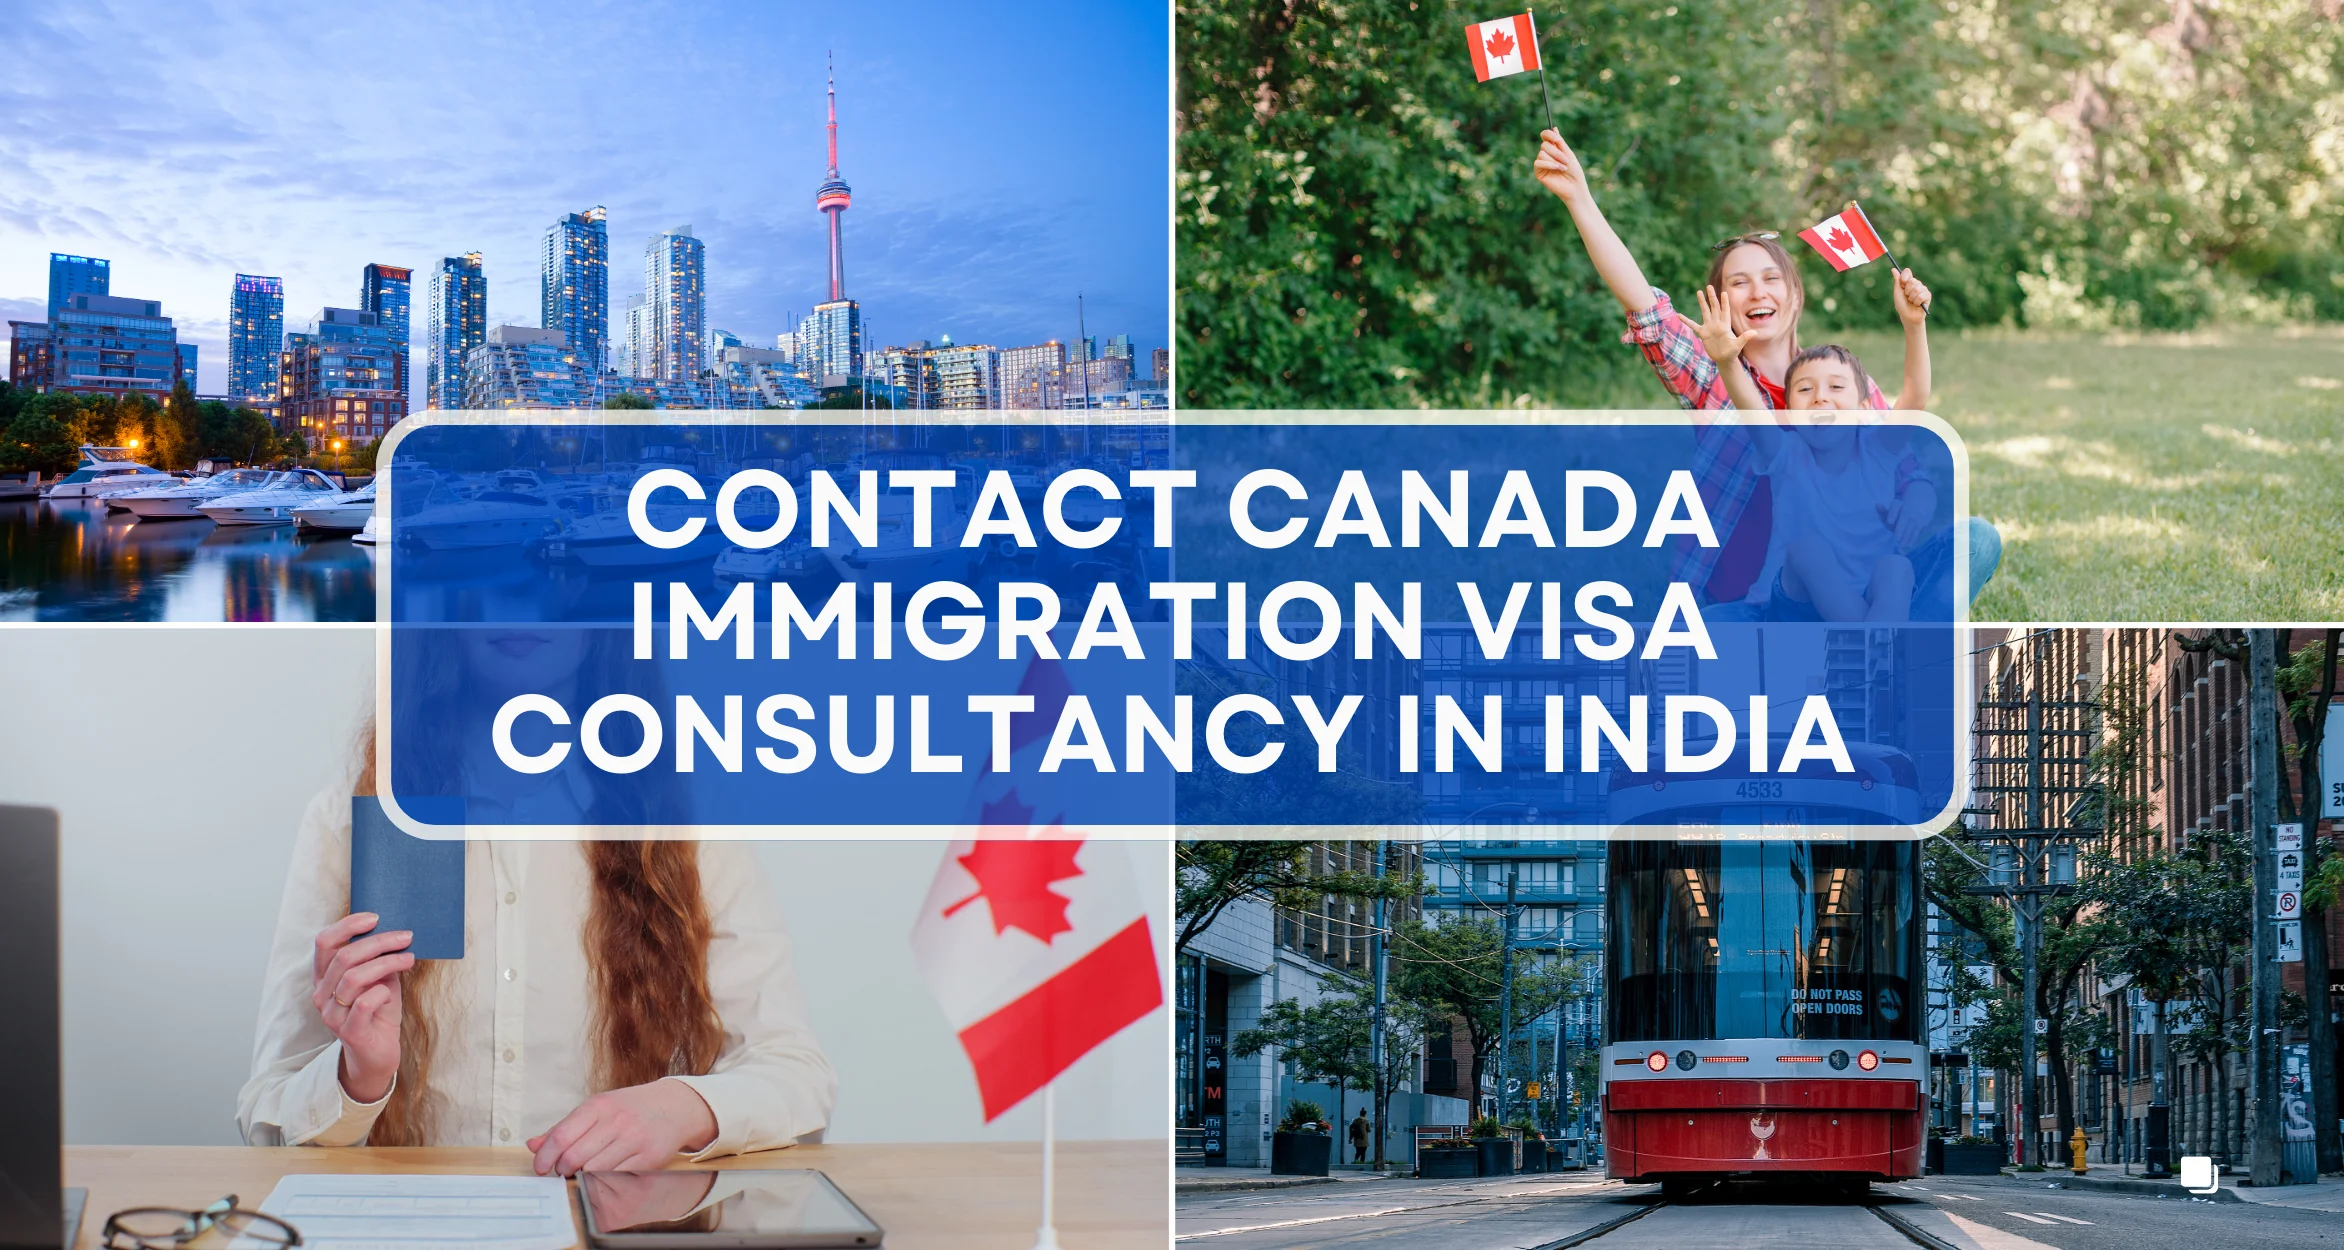 Contact Canada Immigration Visa consultancy in India